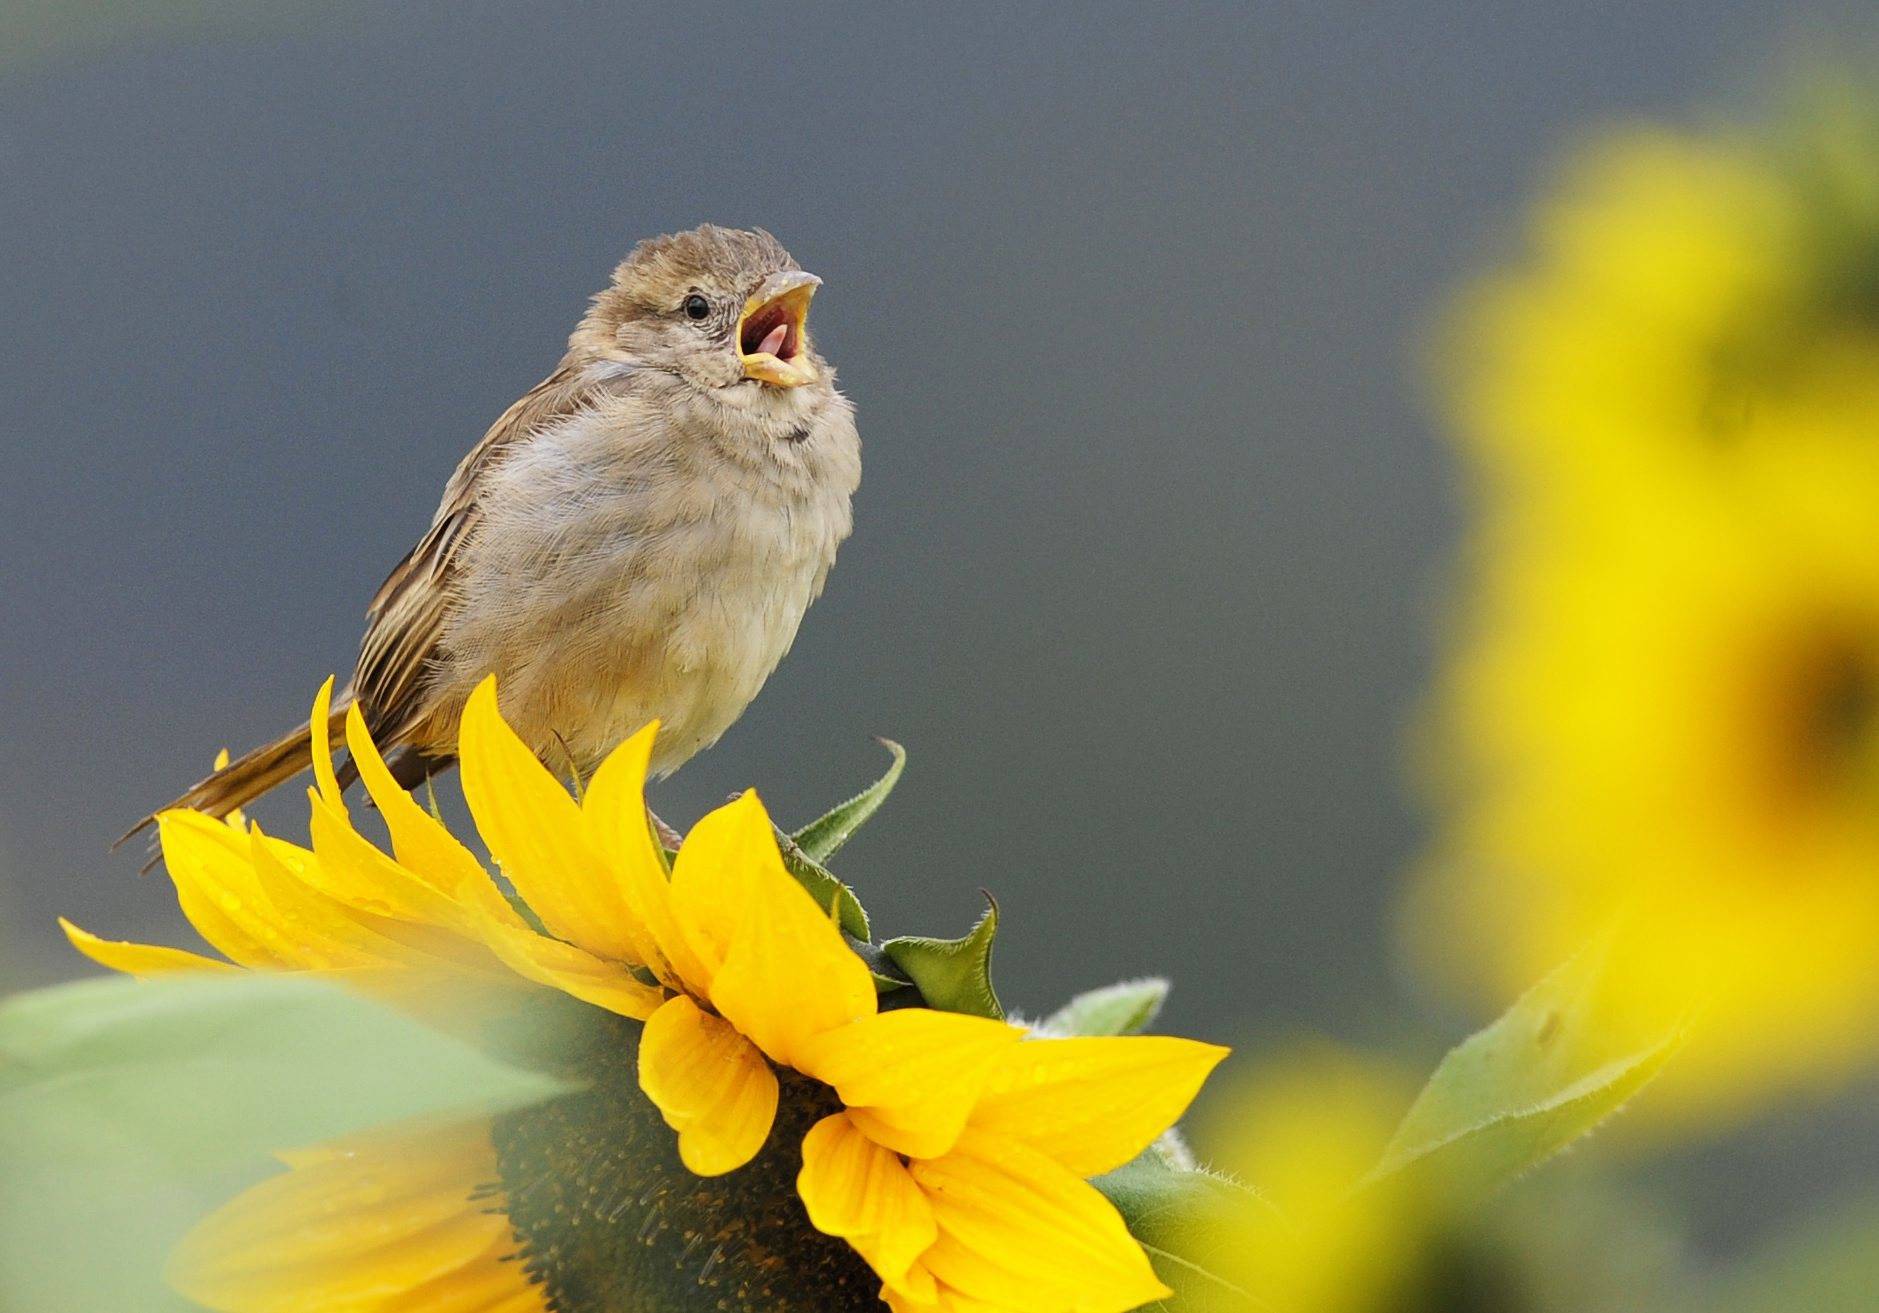 A sparrow is sitting on a sunflower